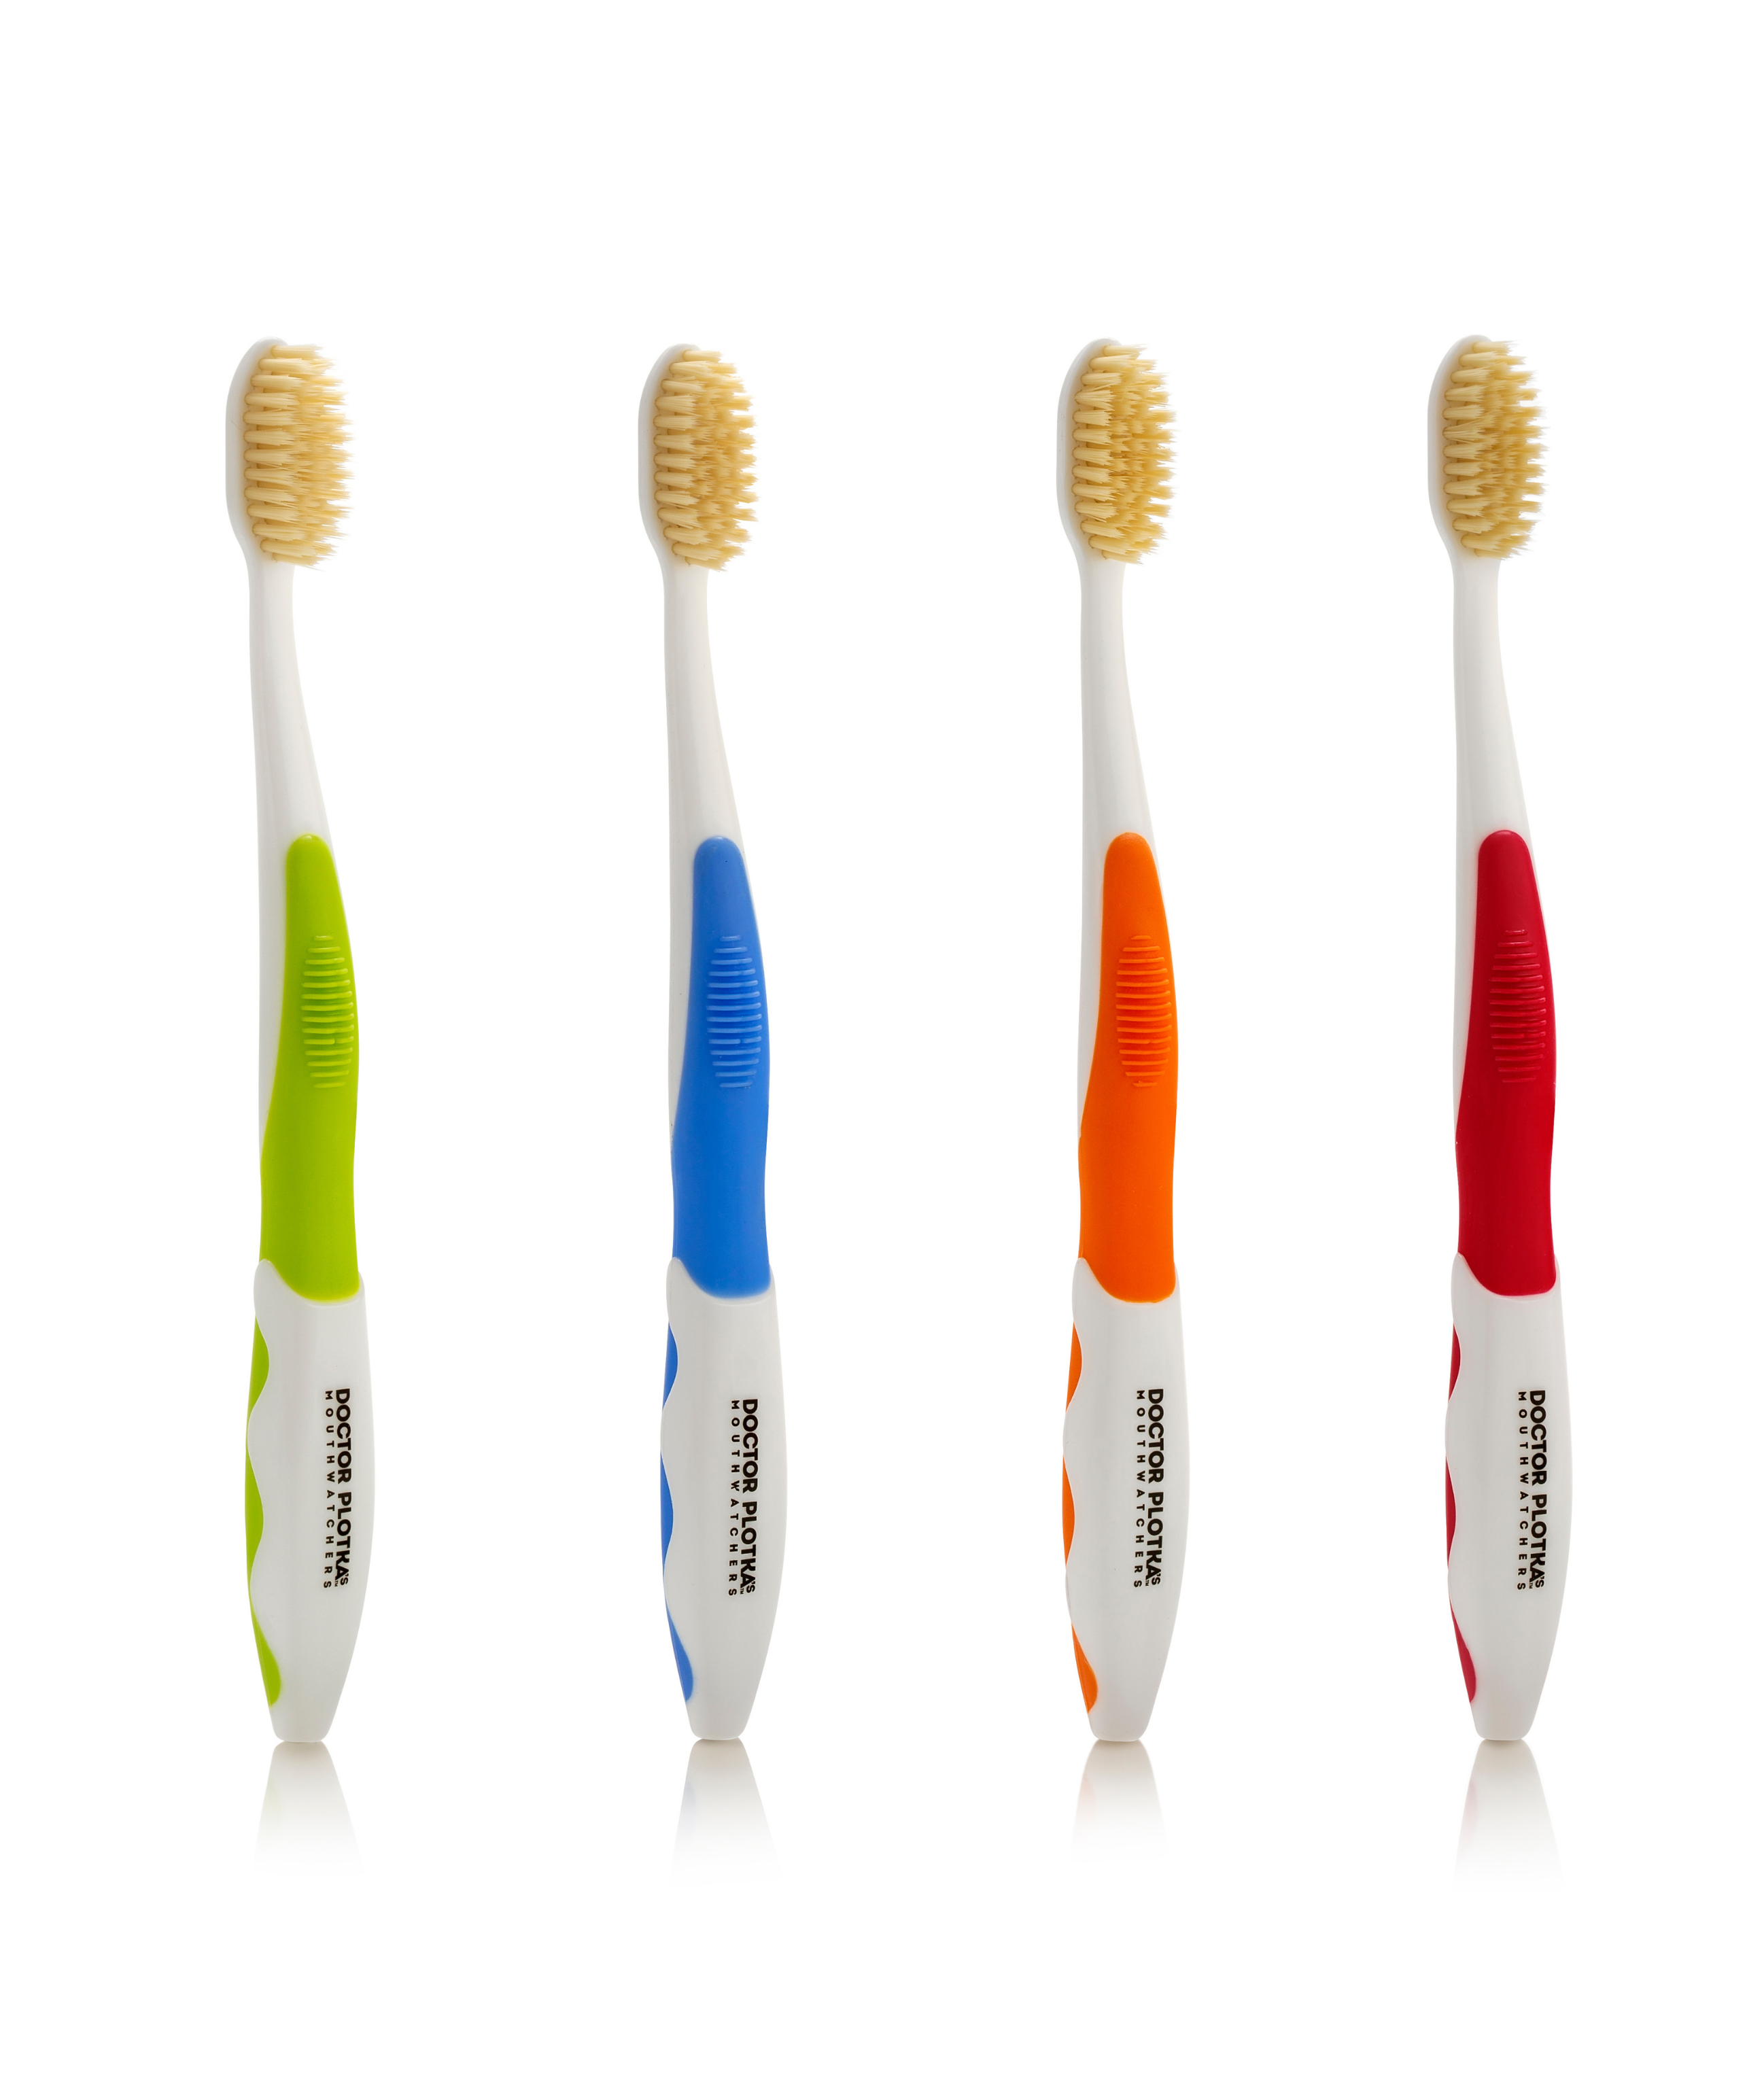 Mouth Watchers Antimicrobial Silver Adult Toothbrush